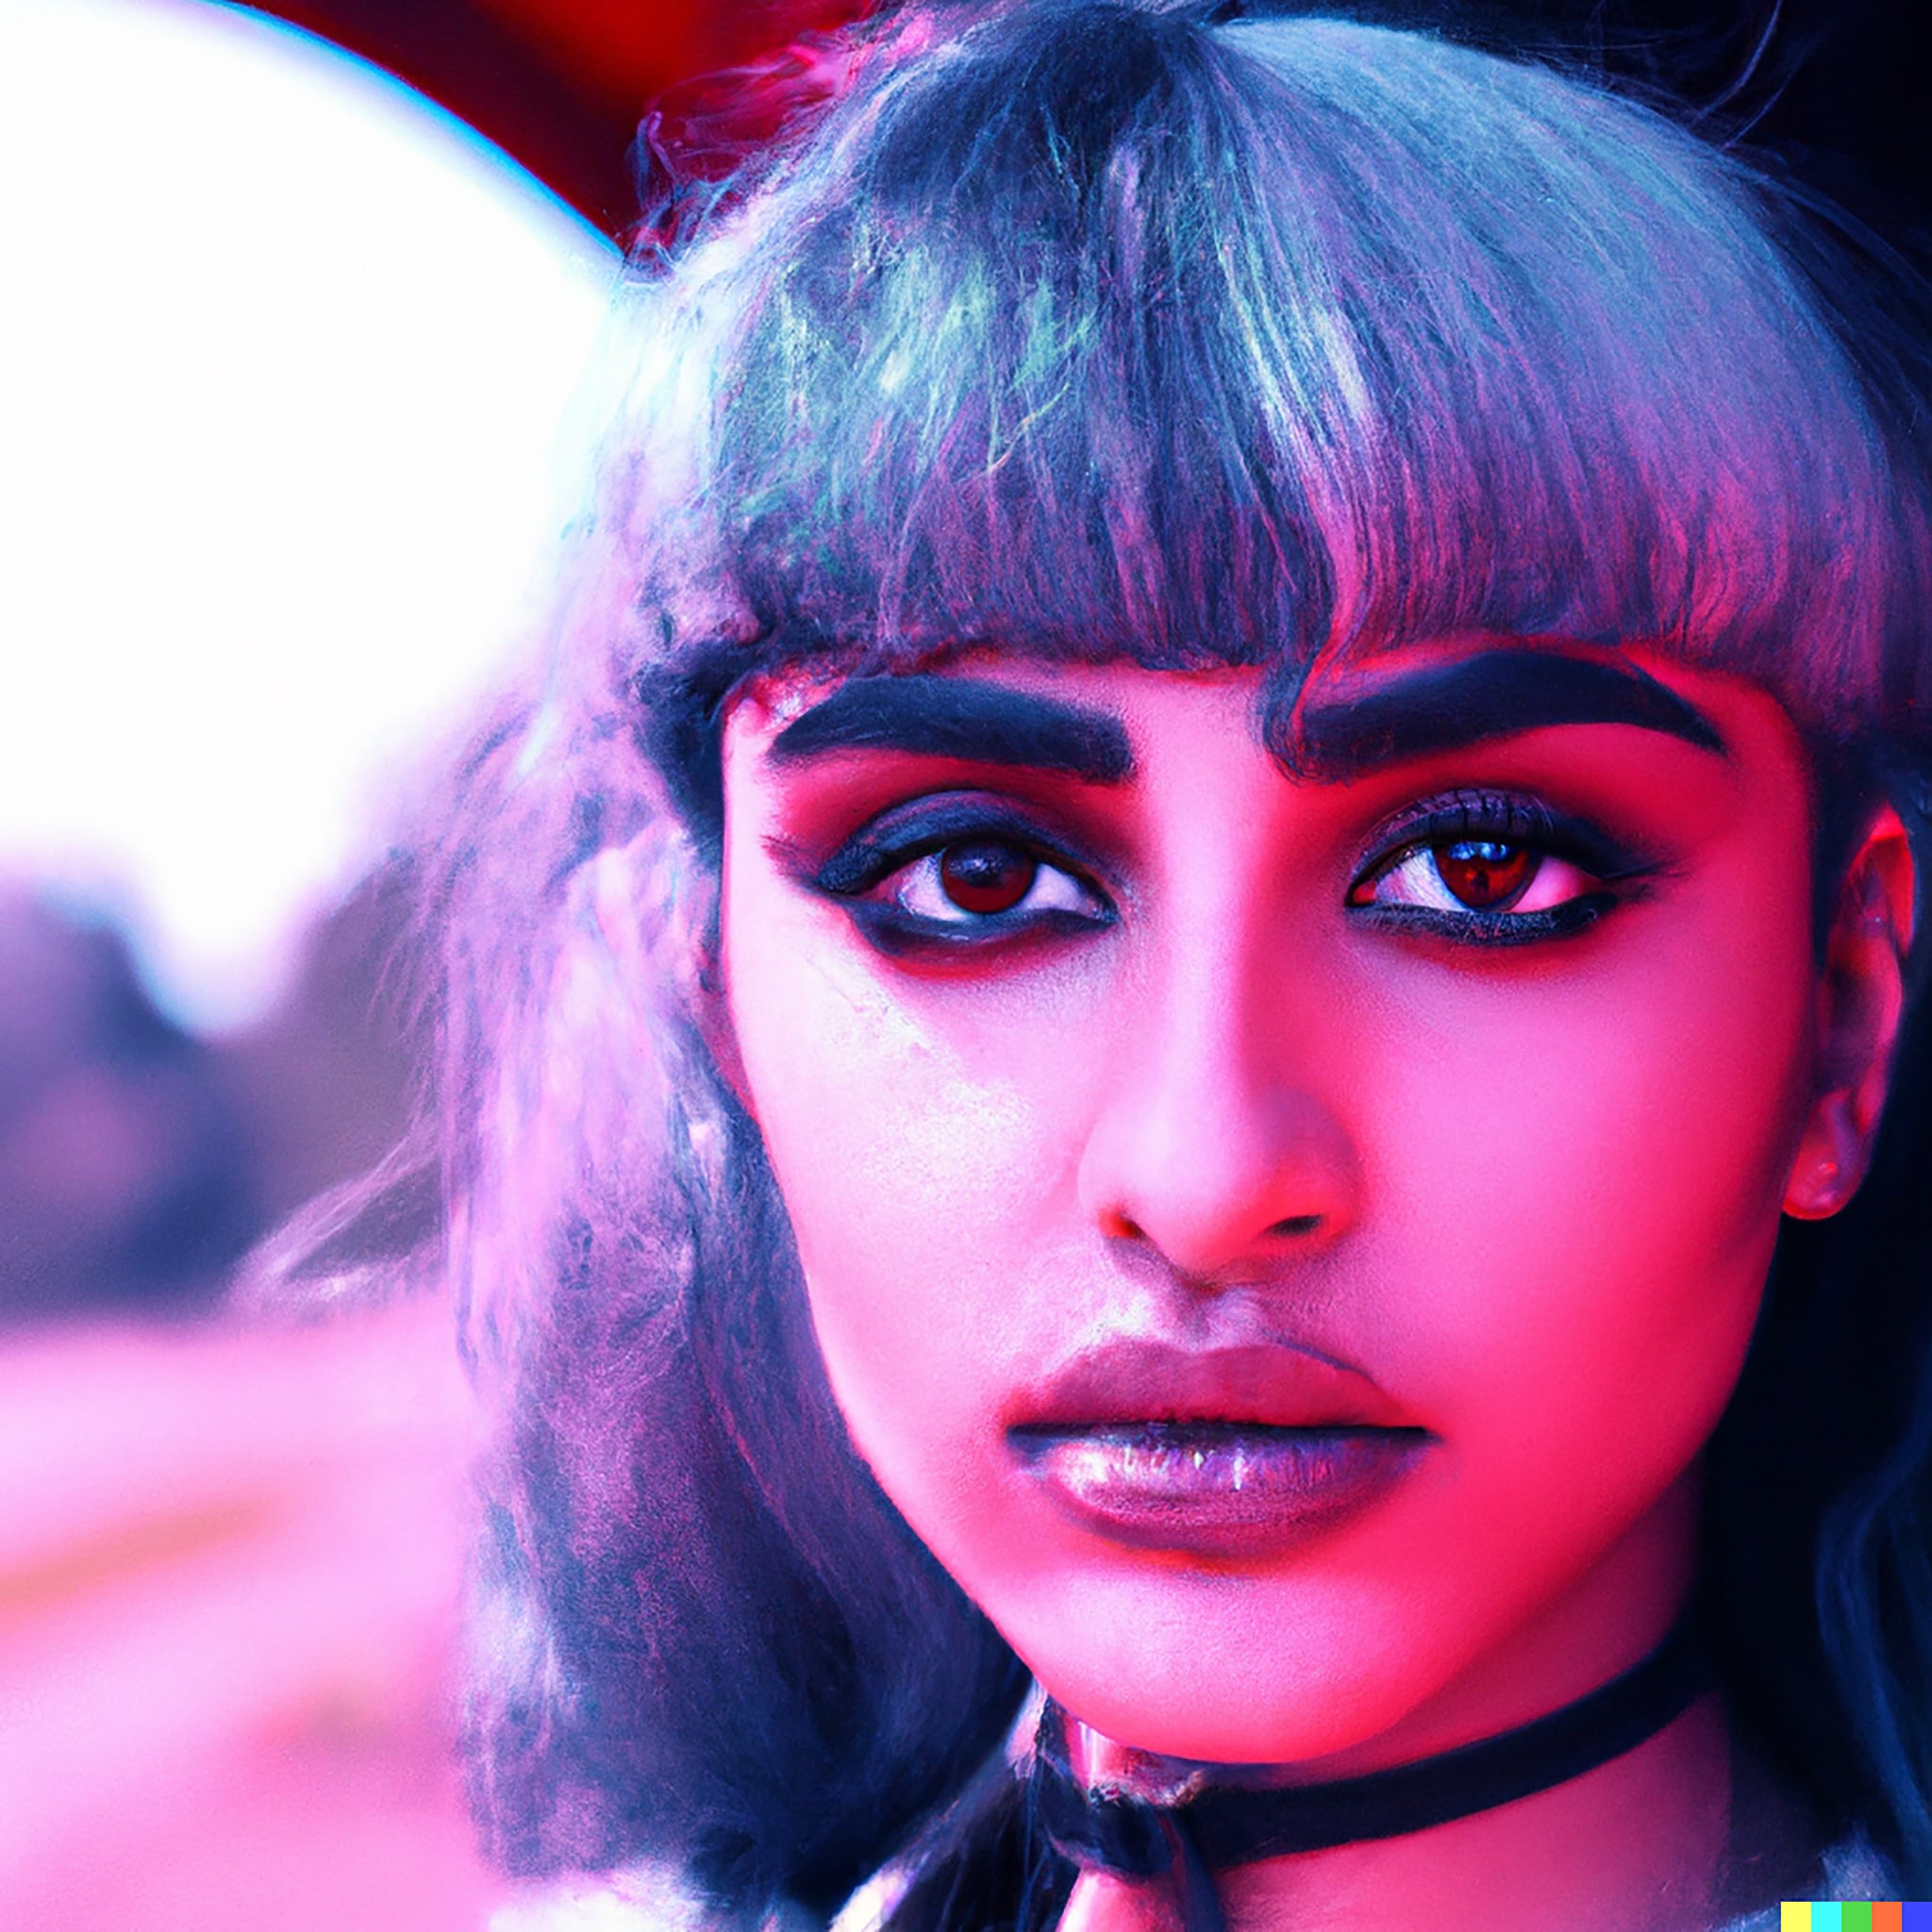 cyberpunk-girl-with-mesmerizing-eyes-and-pink-gray-hair-with-bangs-4